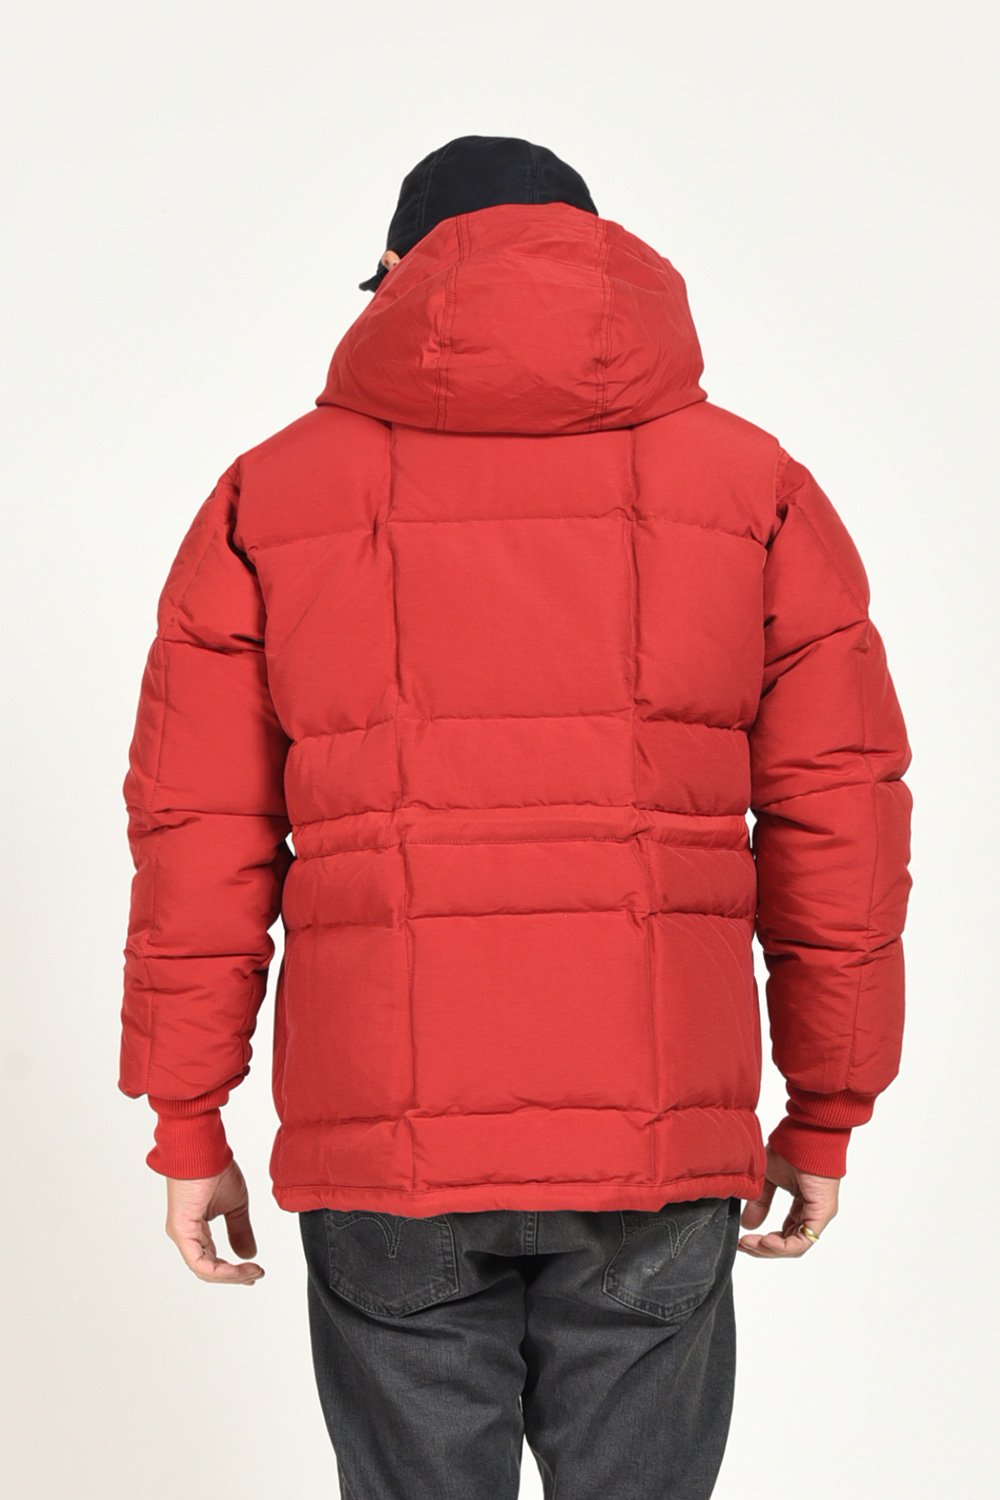 TROPHY CLOTHING(トロフィークロージング) ダウンジャケット ALPINE DOWN JACKET TR19AW-508 通販正規取扱  | ハーレムストア公式通販サイト